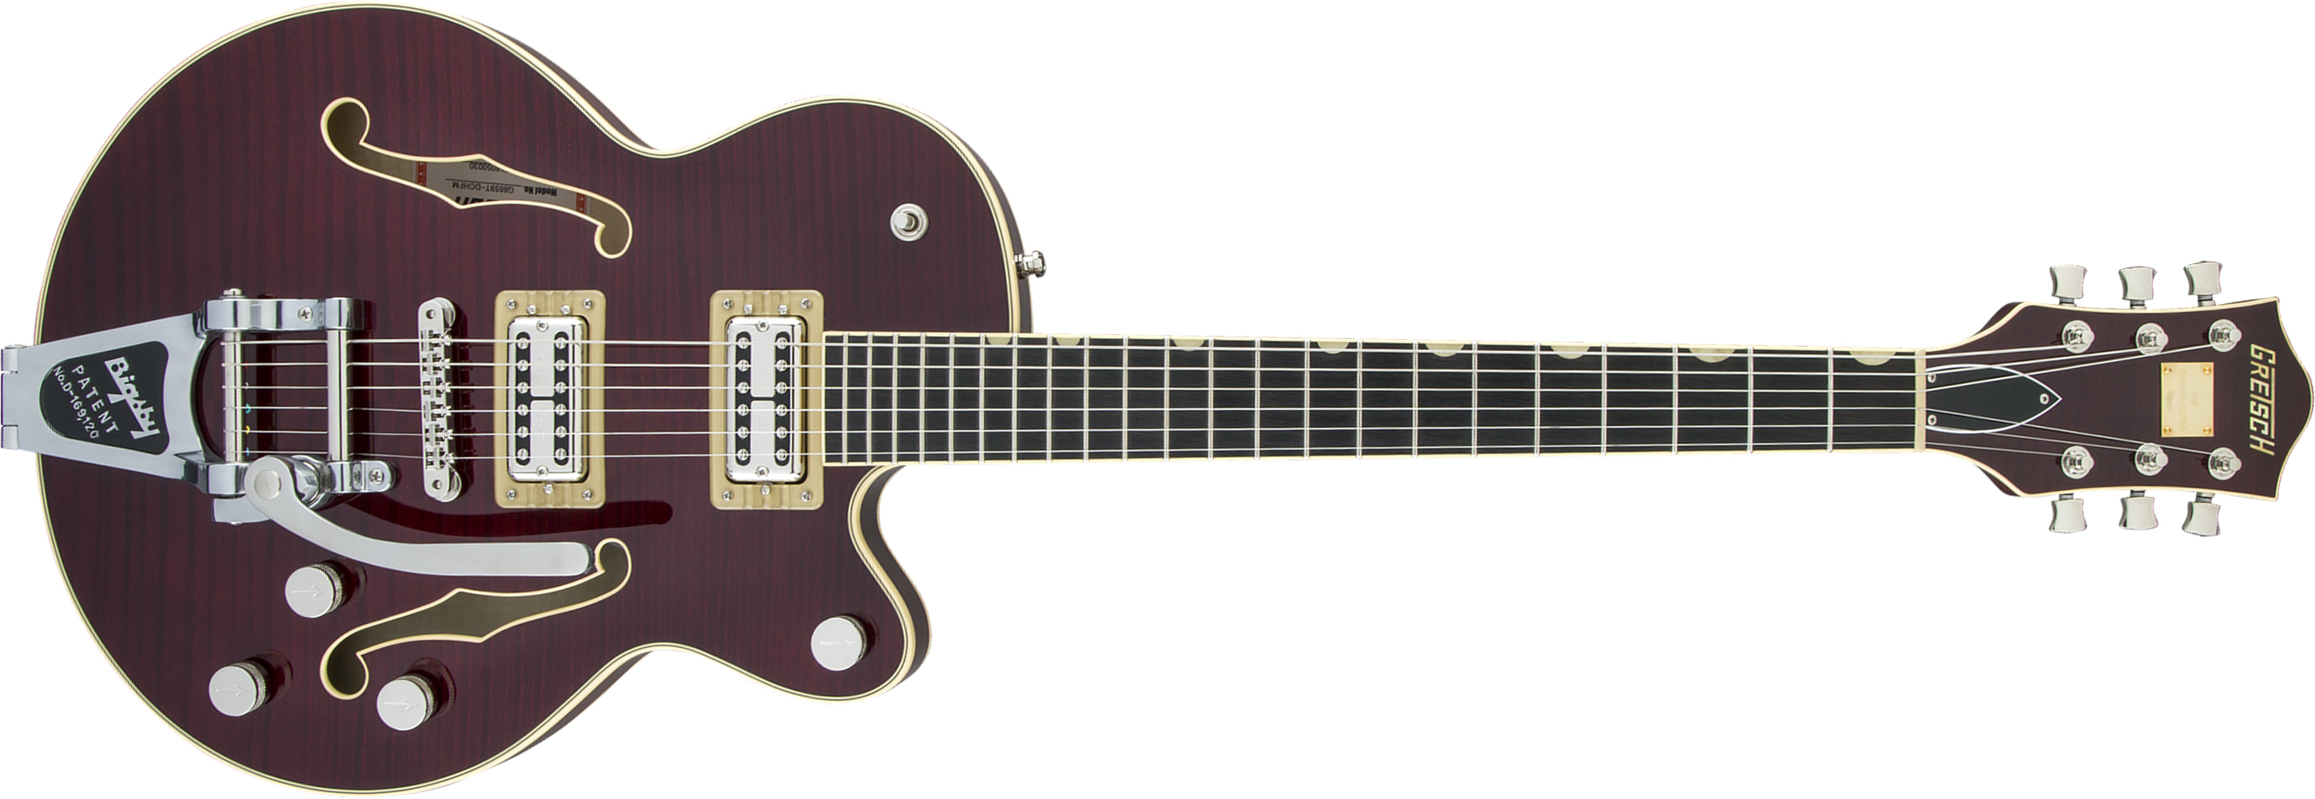 Gretsch G6659tfm Broadkaster Jr Center Bloc Players Edition Pro Jap Bigsby Eb - Dark Cherry Stain - Semi-Hollow E-Gitarre - Main picture